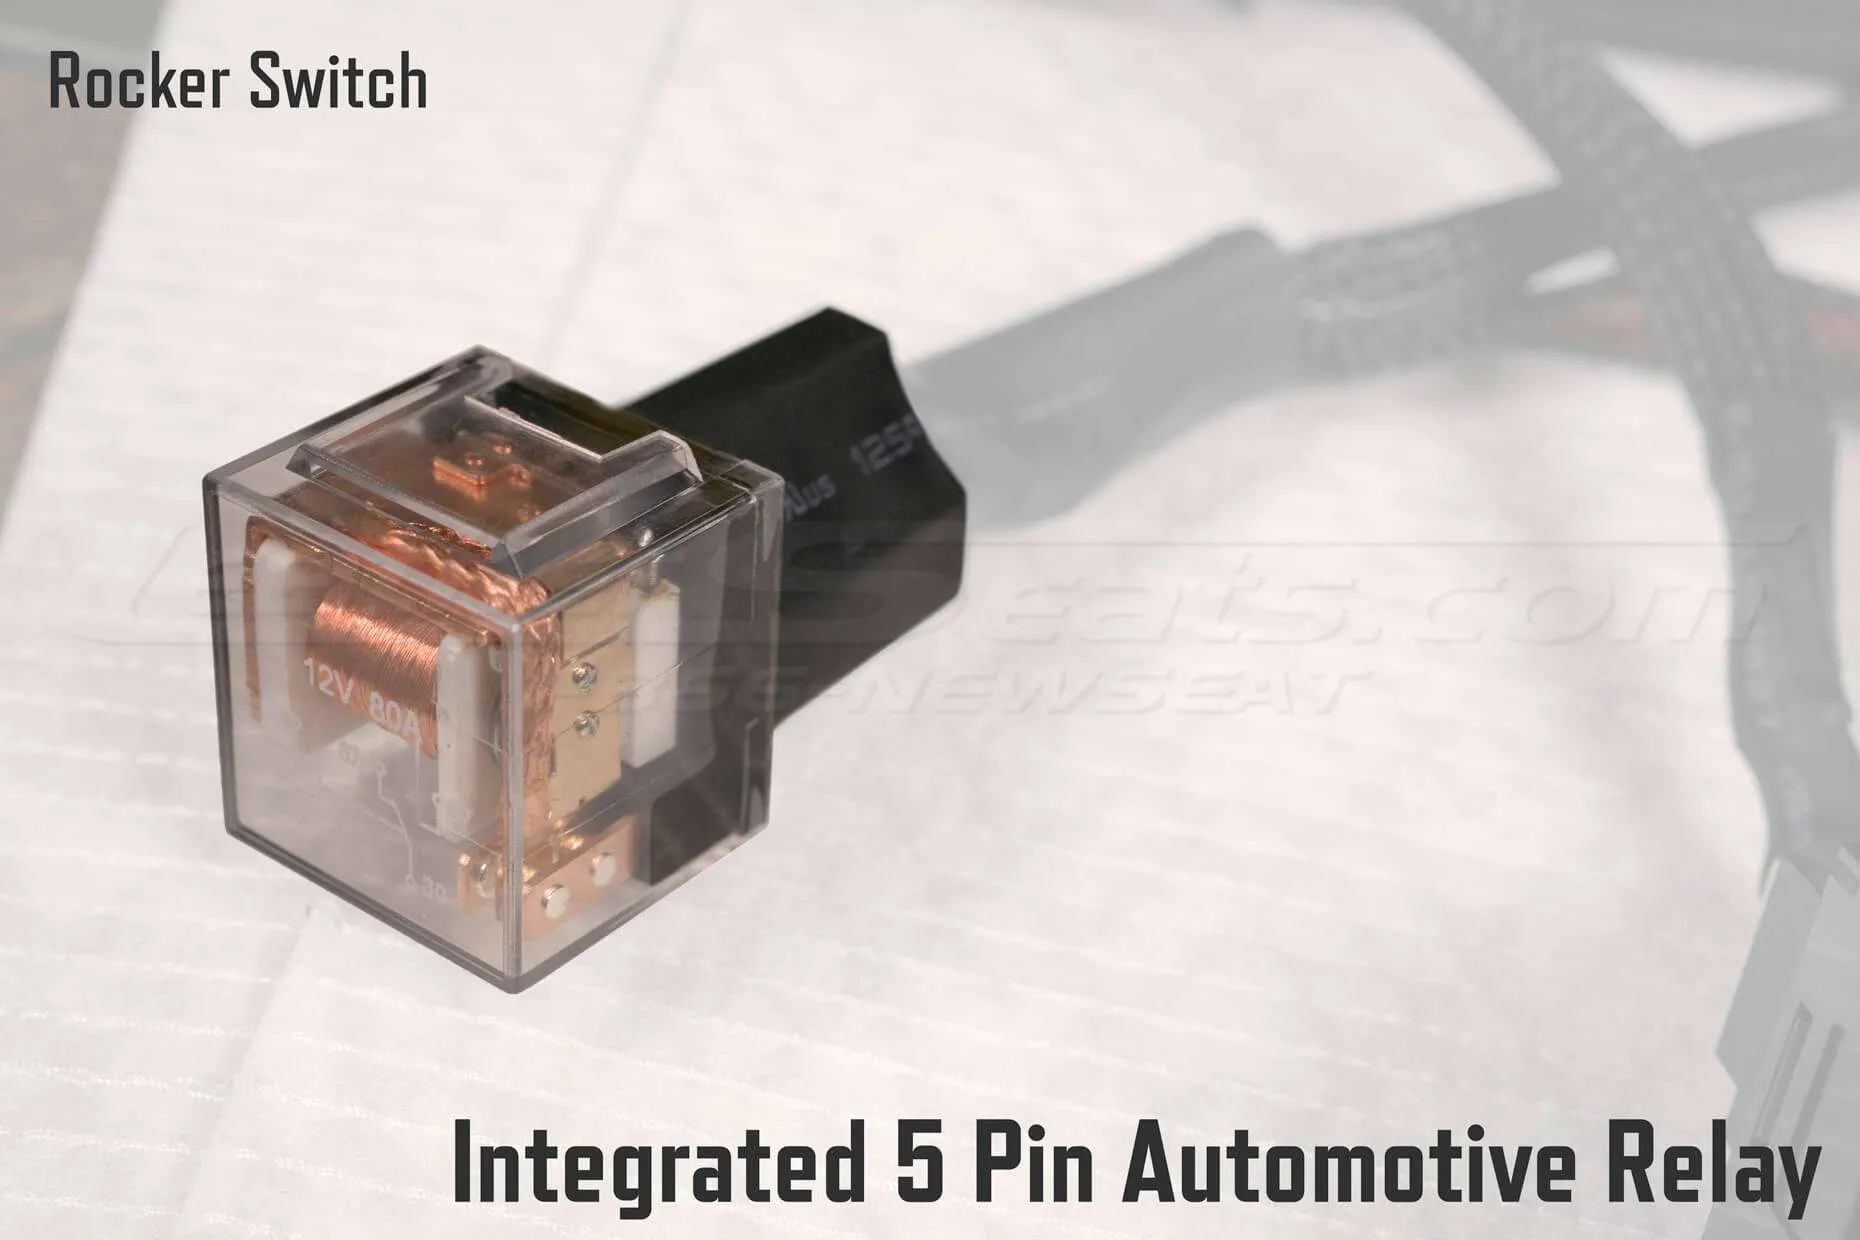 Rocket Switch Integrated 5 Pin Automotive Relay